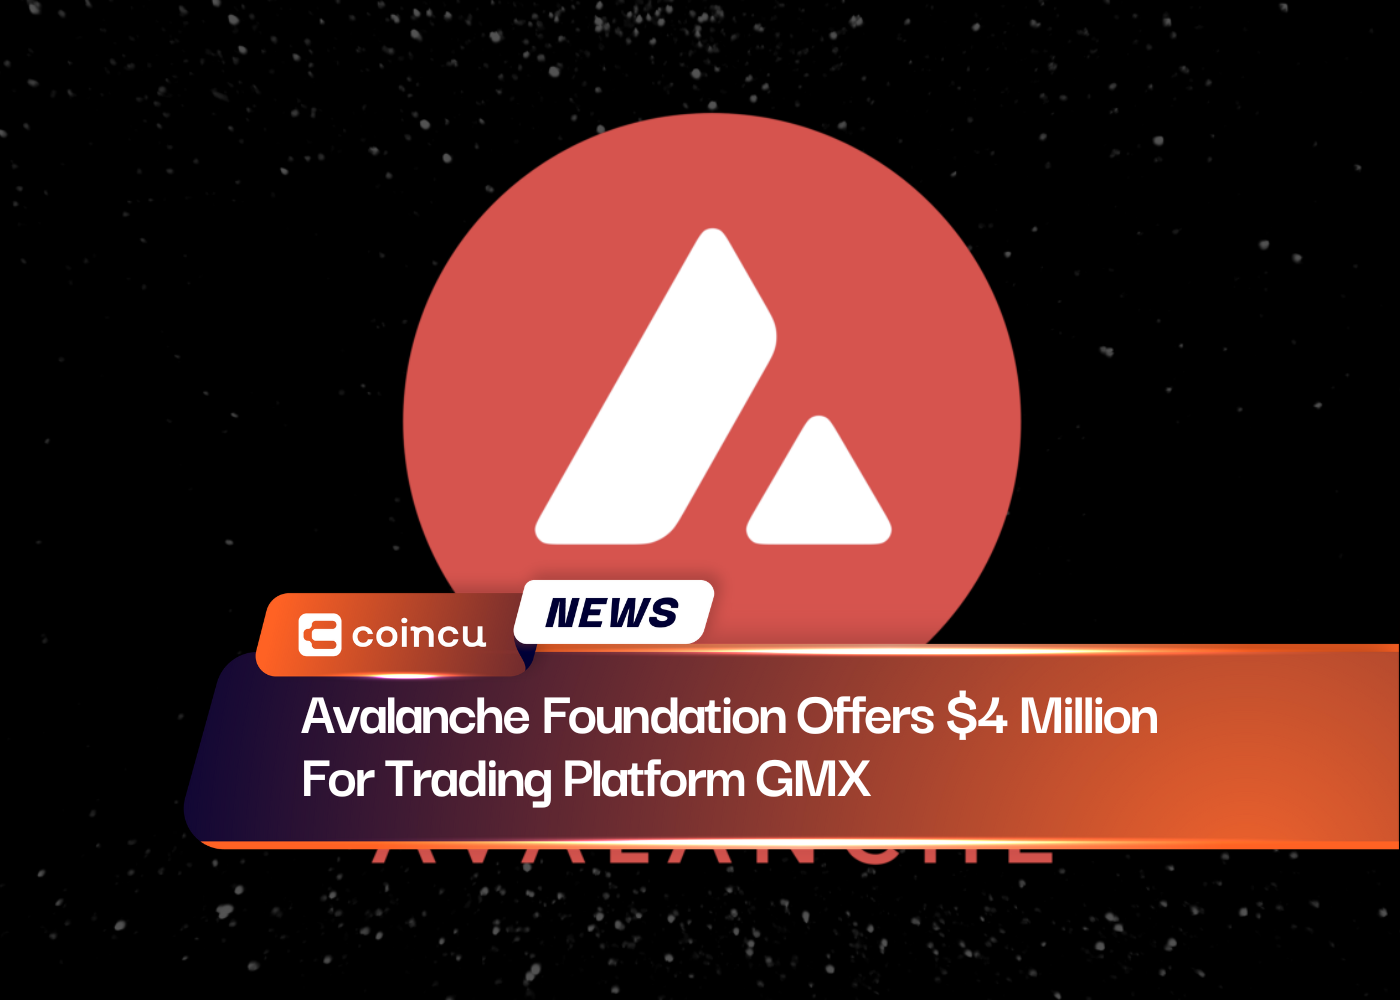 Avalanche Foundation Offers $4 Million For Trading Platform GMX